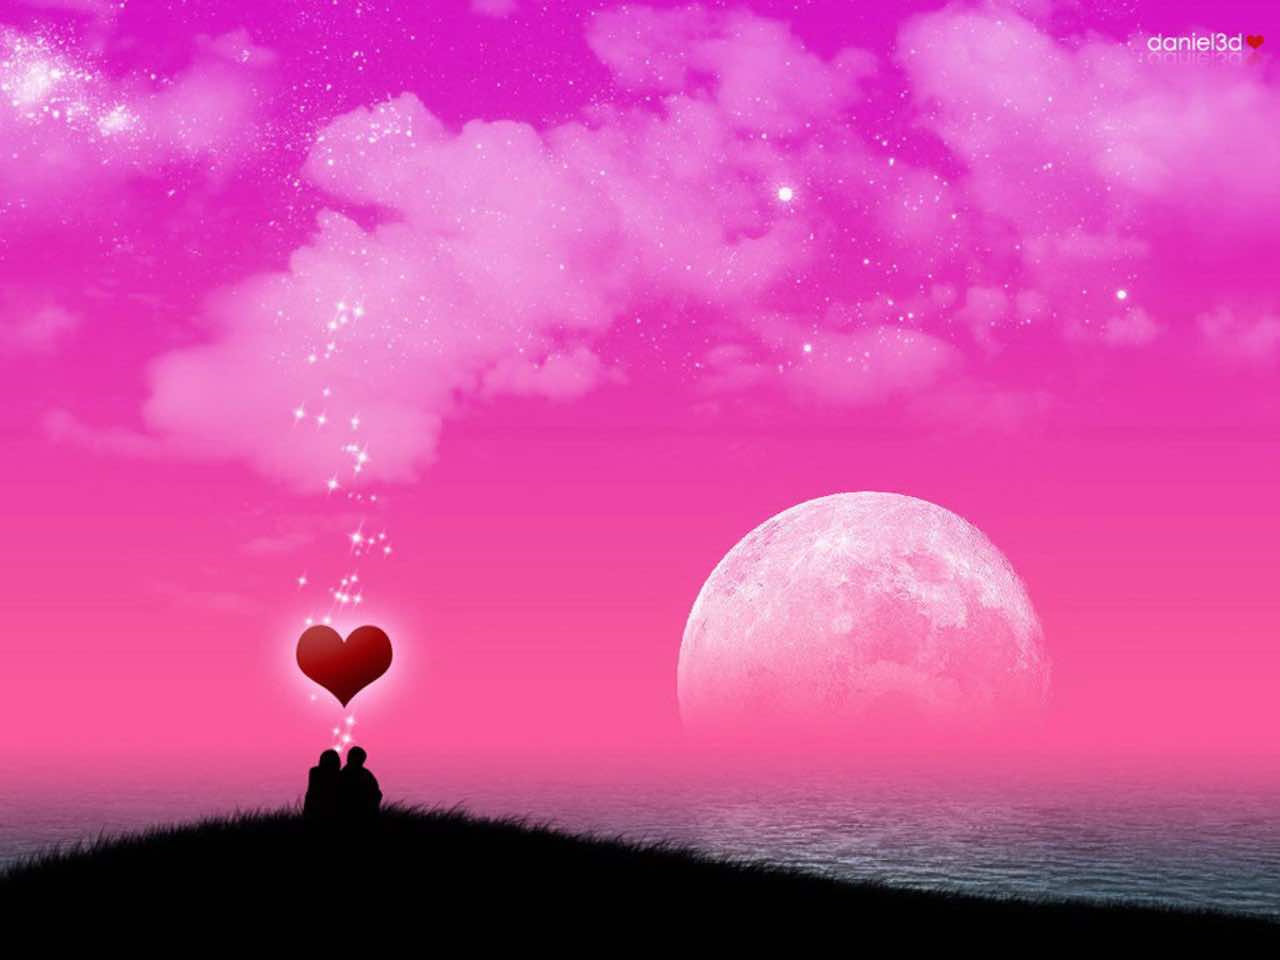 100+ High Def Romantic Wallpapers For People With Love And ...